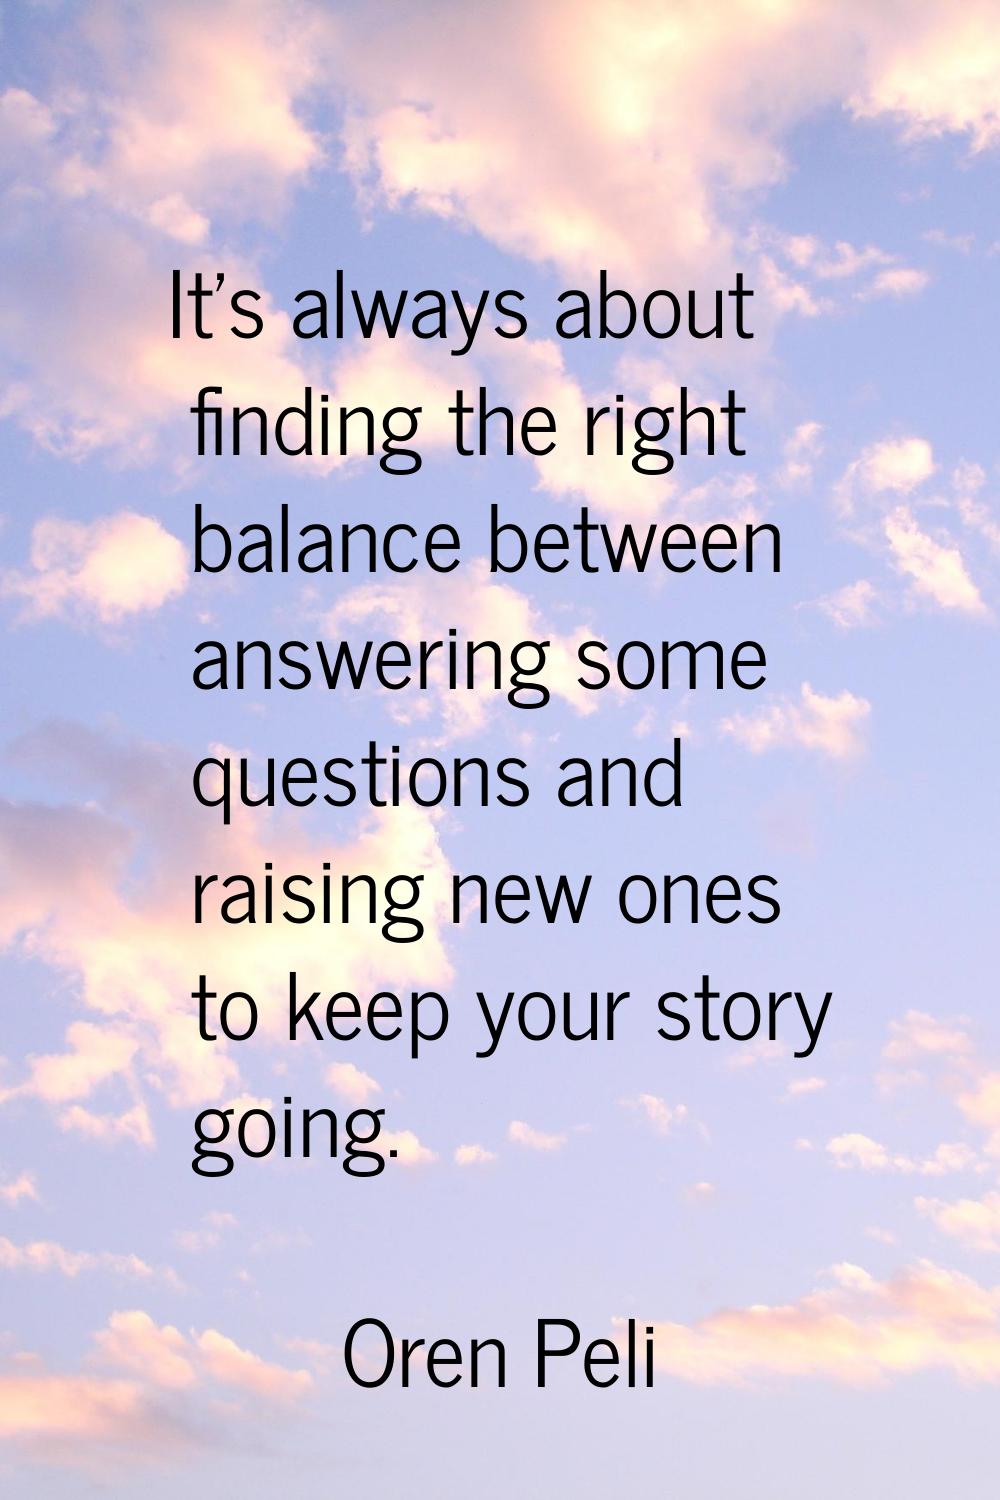 It's always about finding the right balance between answering some questions and raising new ones t